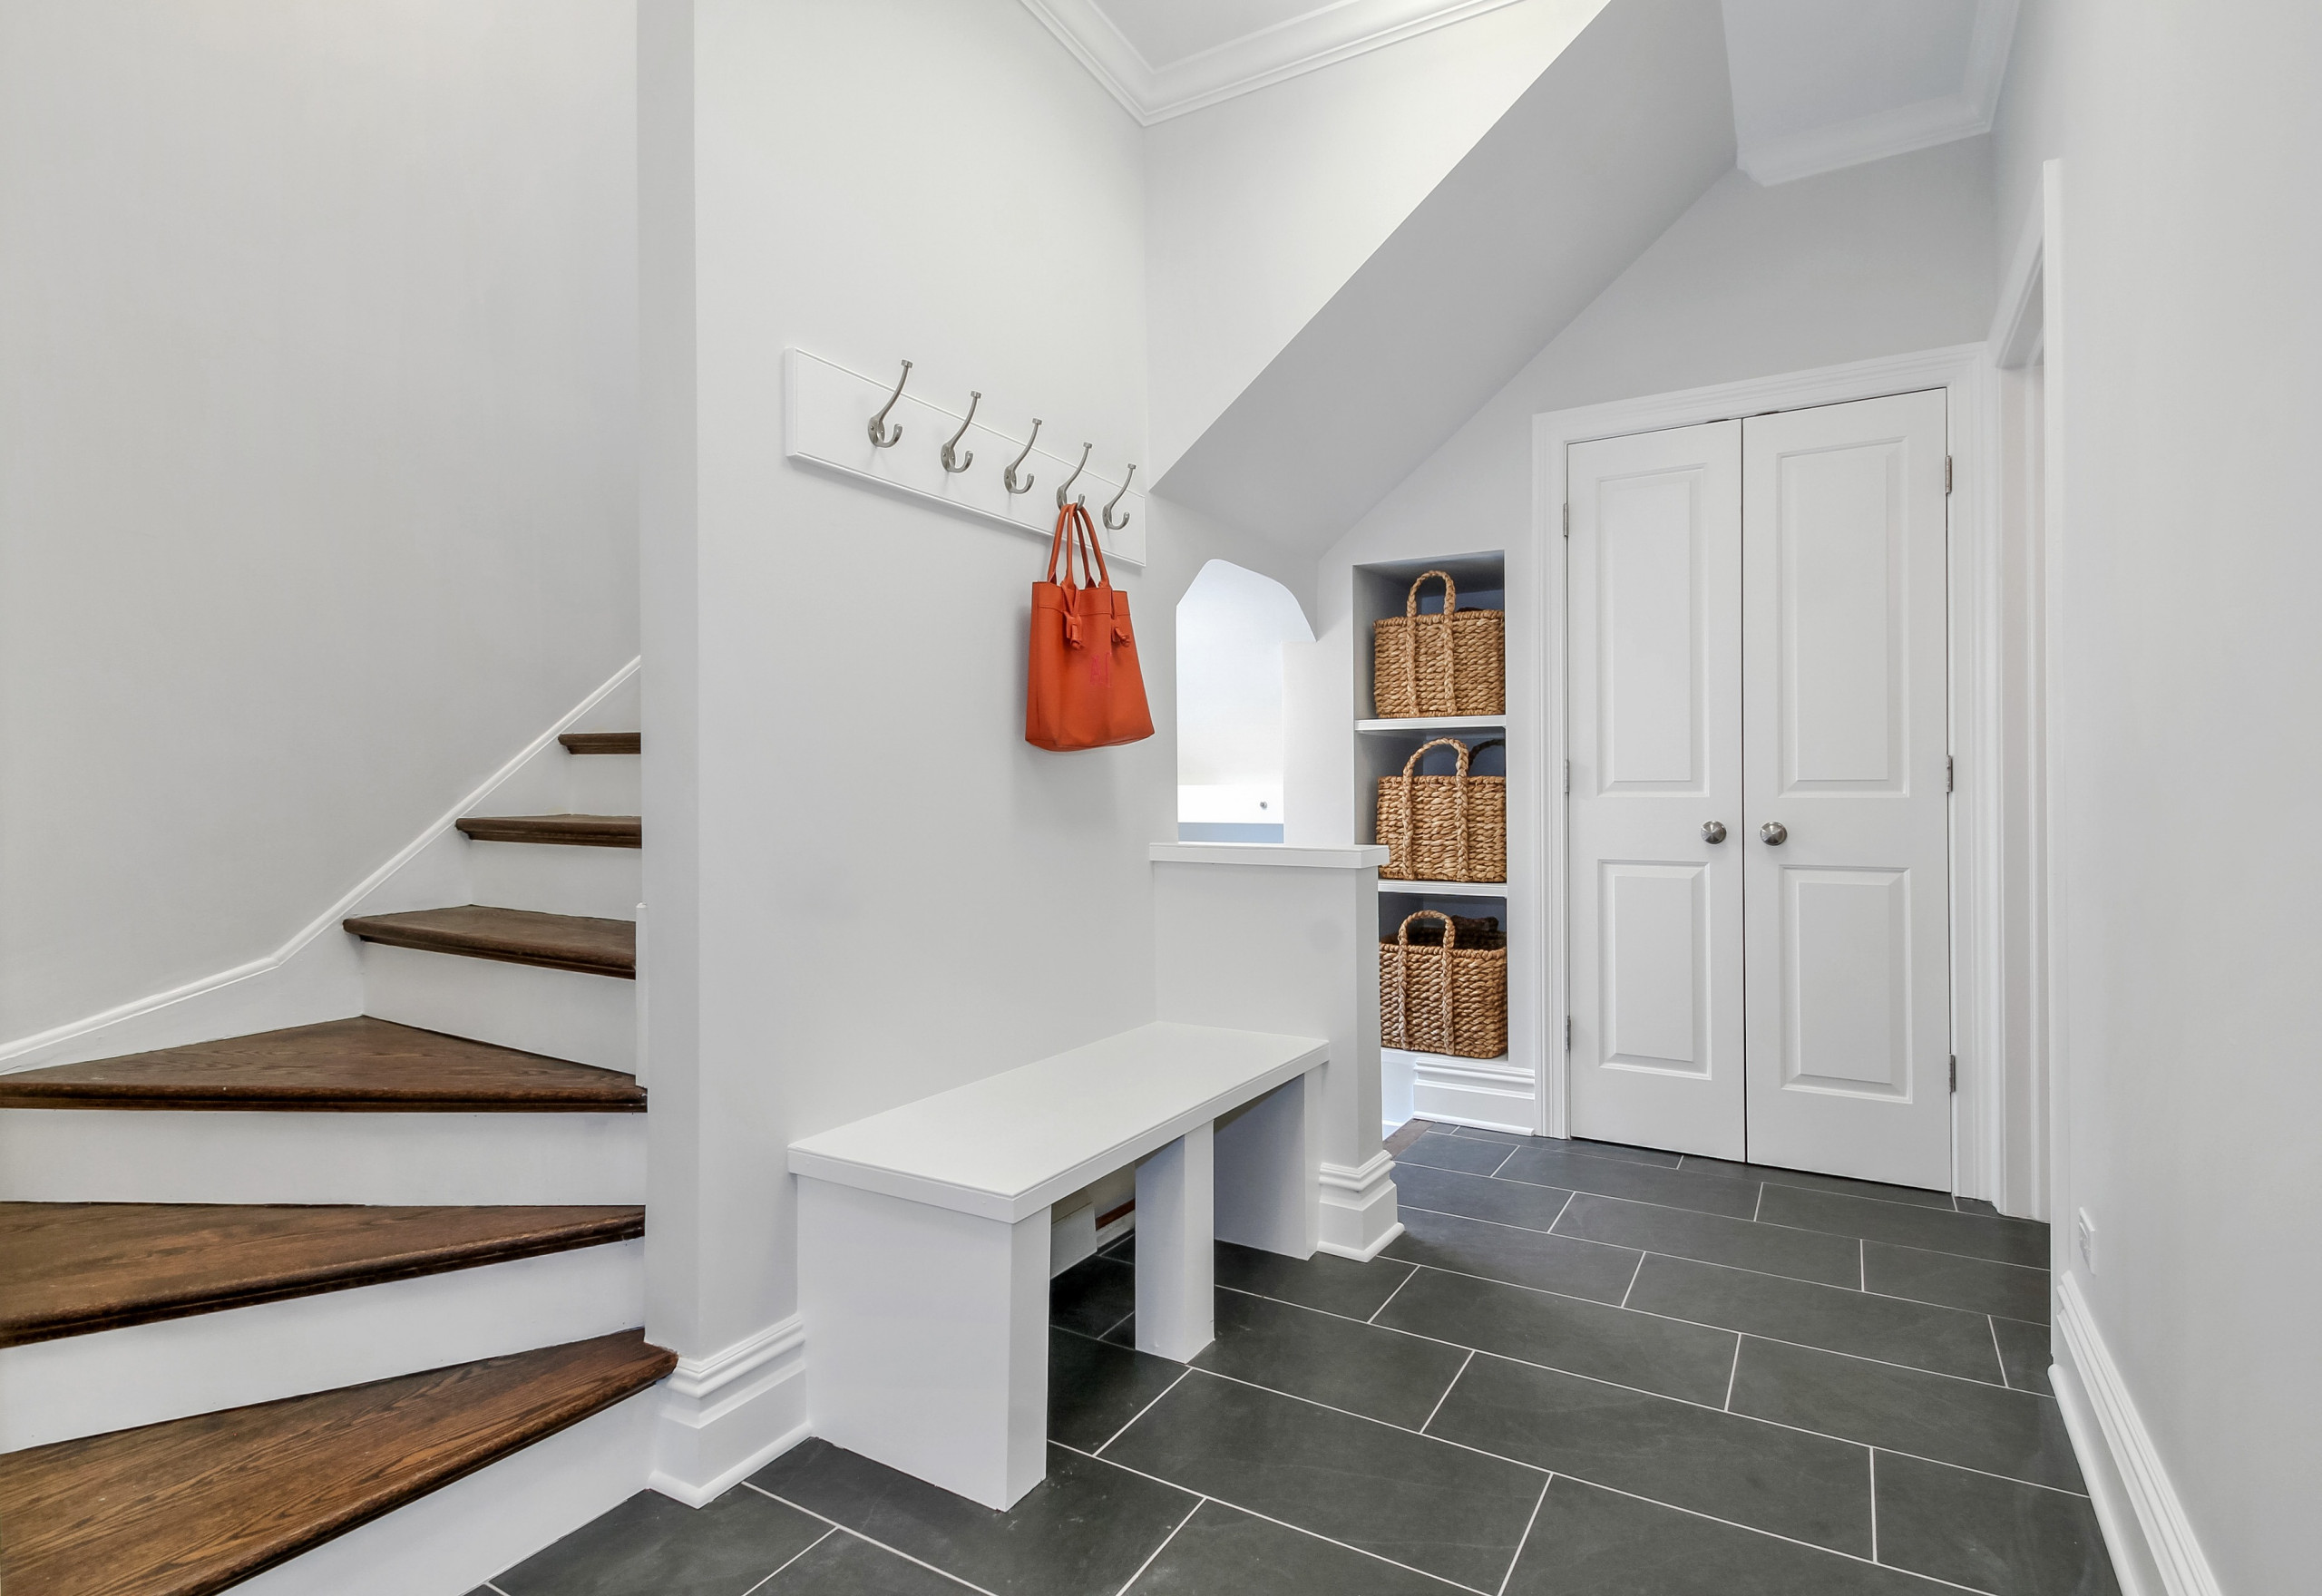 https://st.hzcdn.com/simgs/pictures/entryways/chestnut-mudroom-dave-amy-chung-compass-real-estate-img~1671302c08830352_14-5489-1-1f2b679.jpg